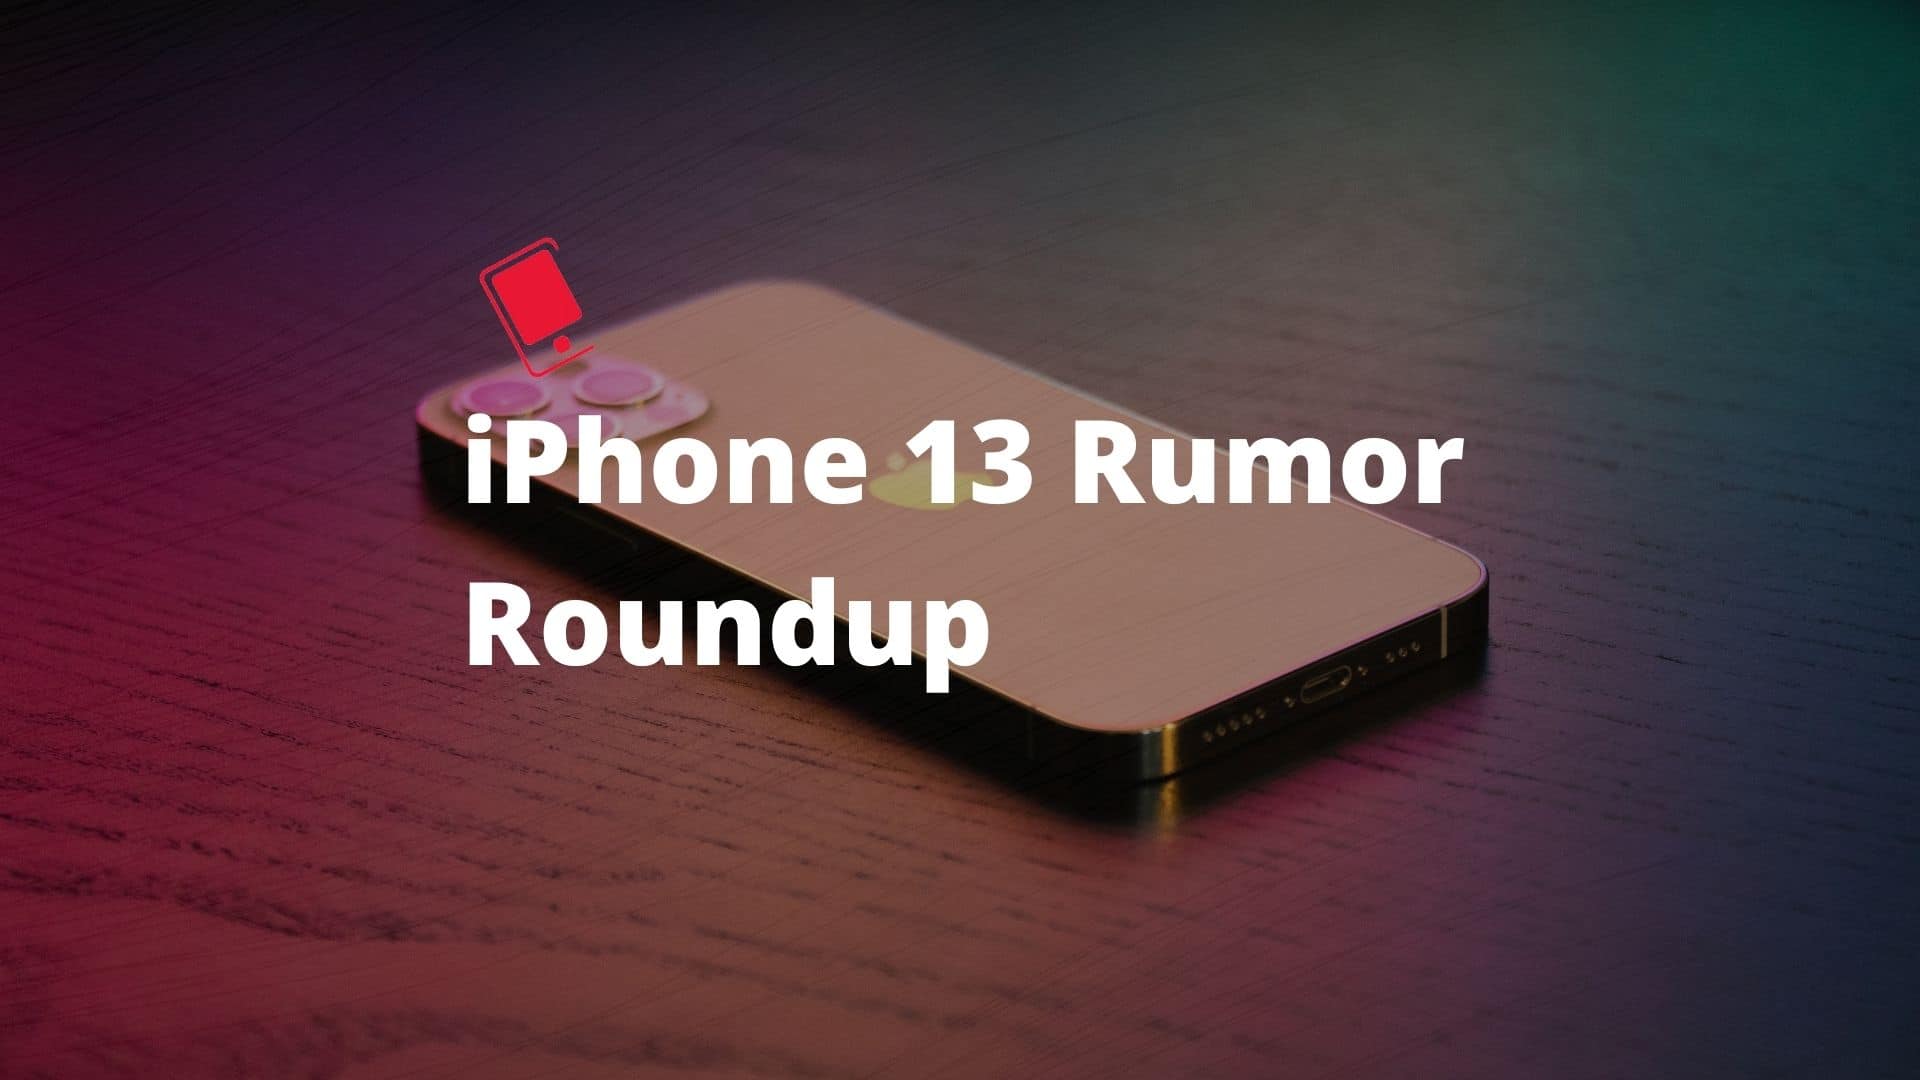 Confirmed iPhone 13 Features based on leaks